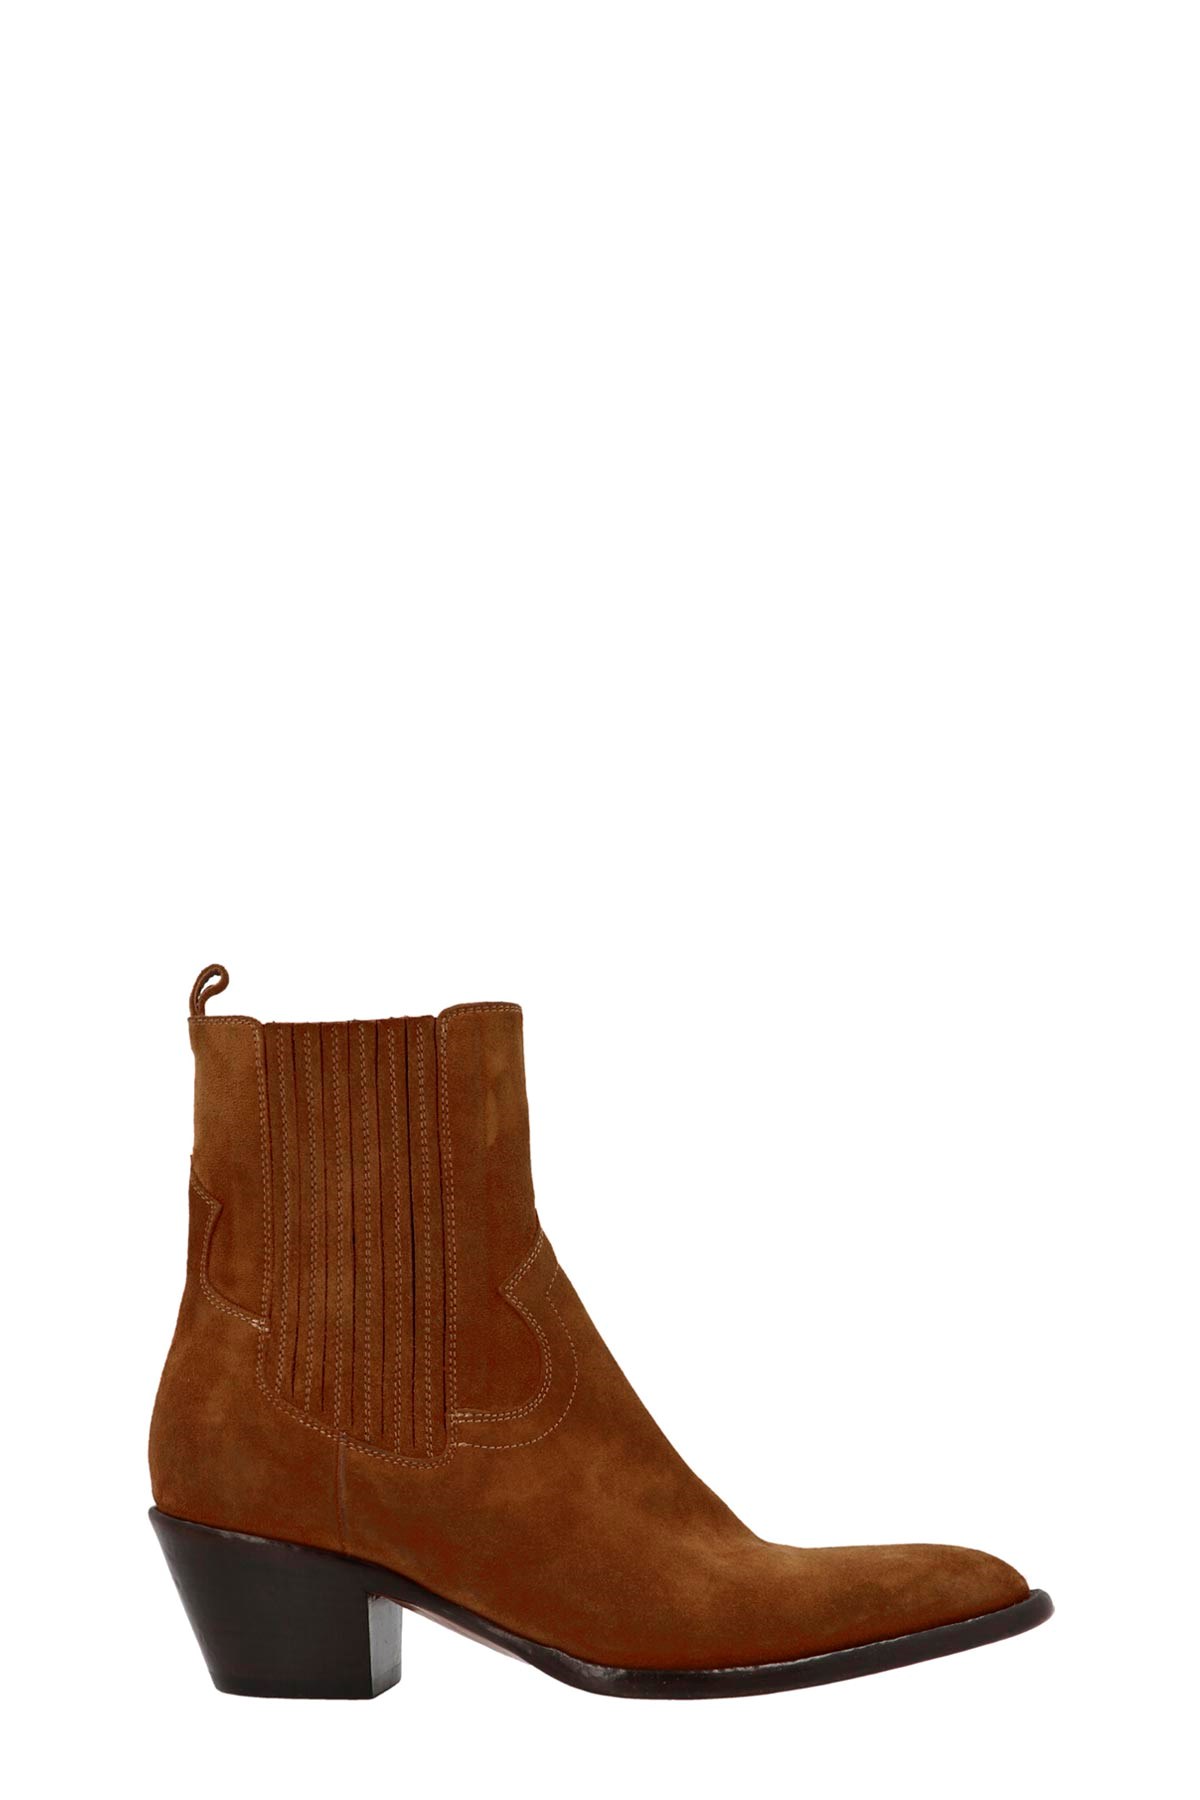 BUTTERO 'Annie’ Ankle Boots